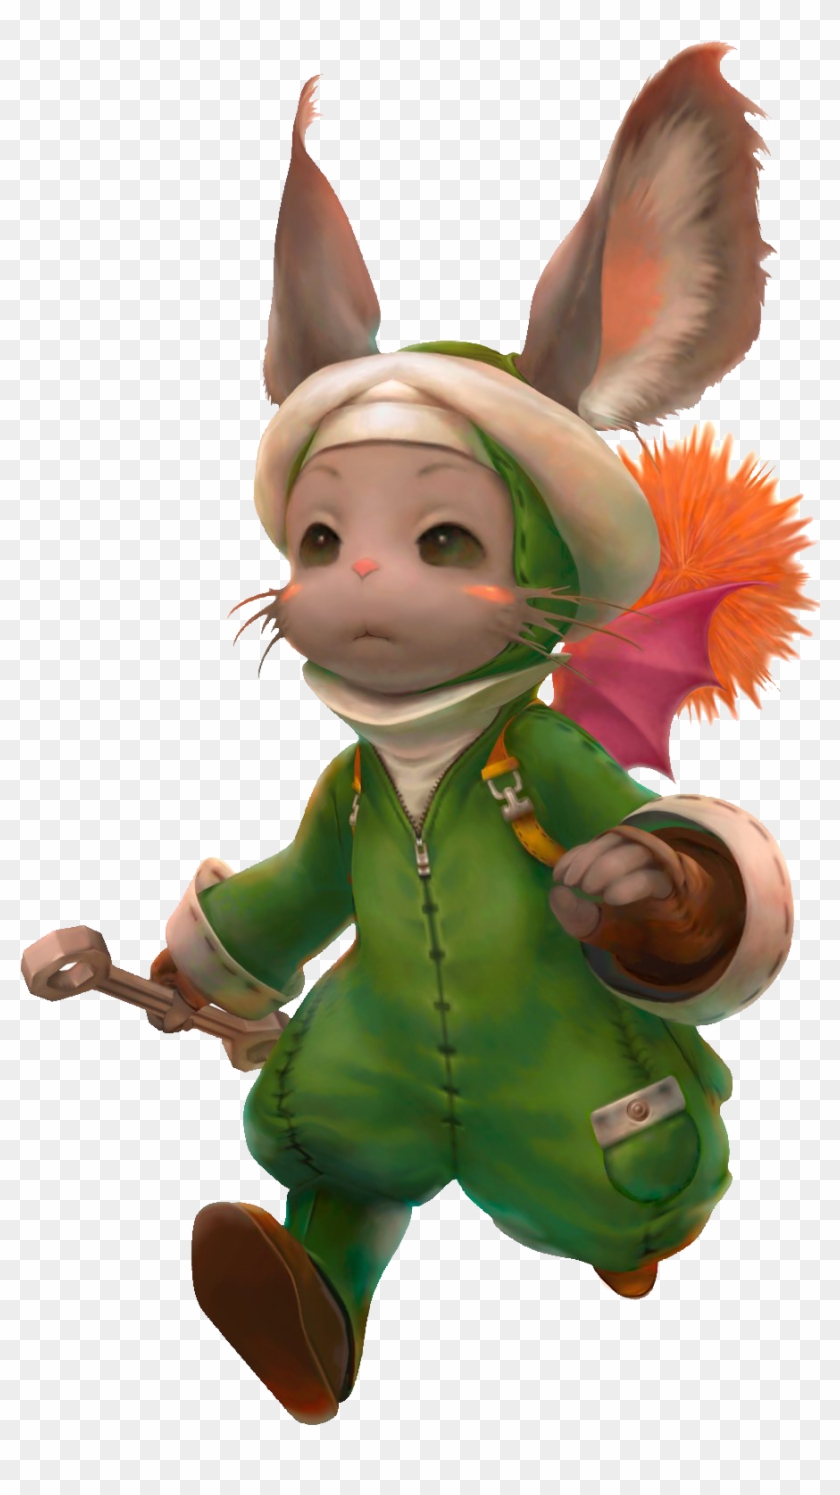 How Do You All Feel About The Ivalice Moogles For A - Final Fantasy 12 Moogle #650070